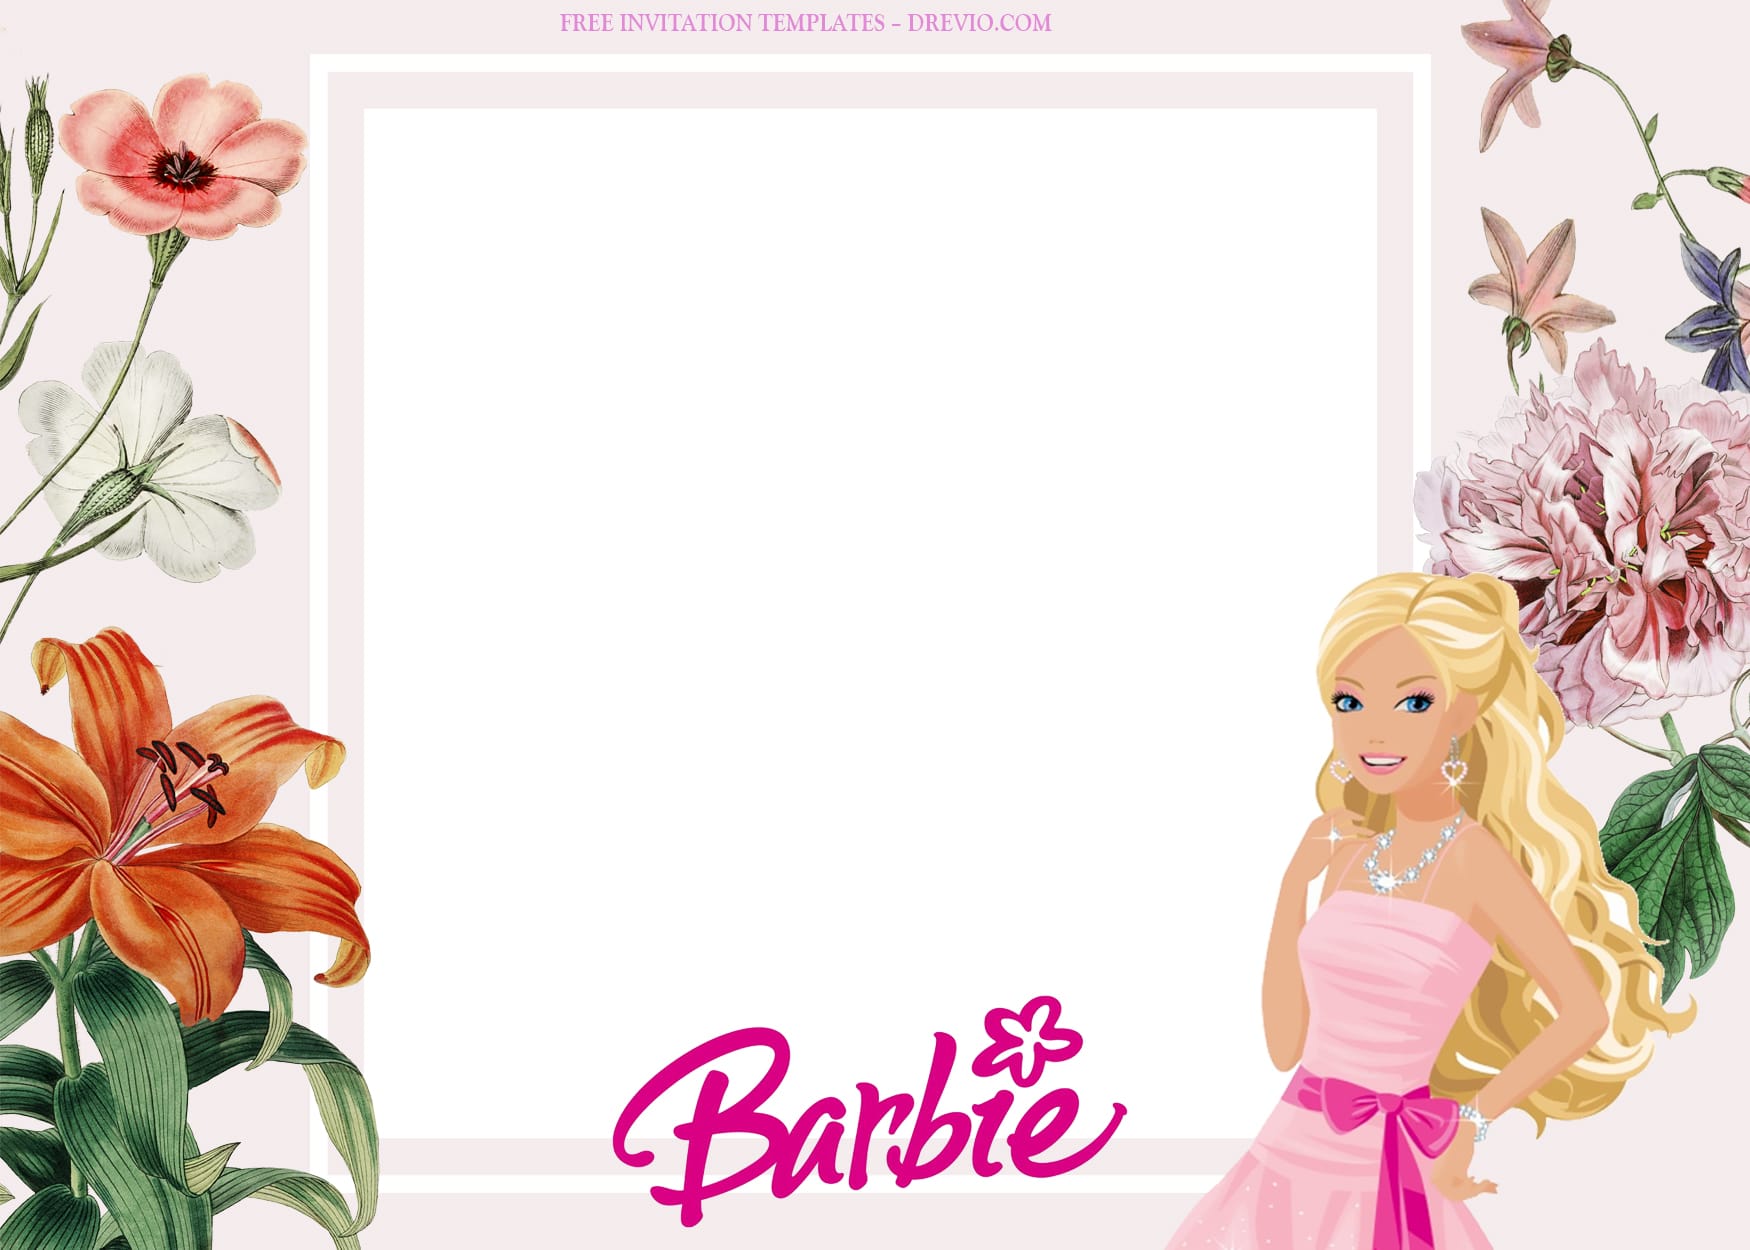 8+ A Good Day With Barbie Birthday Invitation Templates Type One